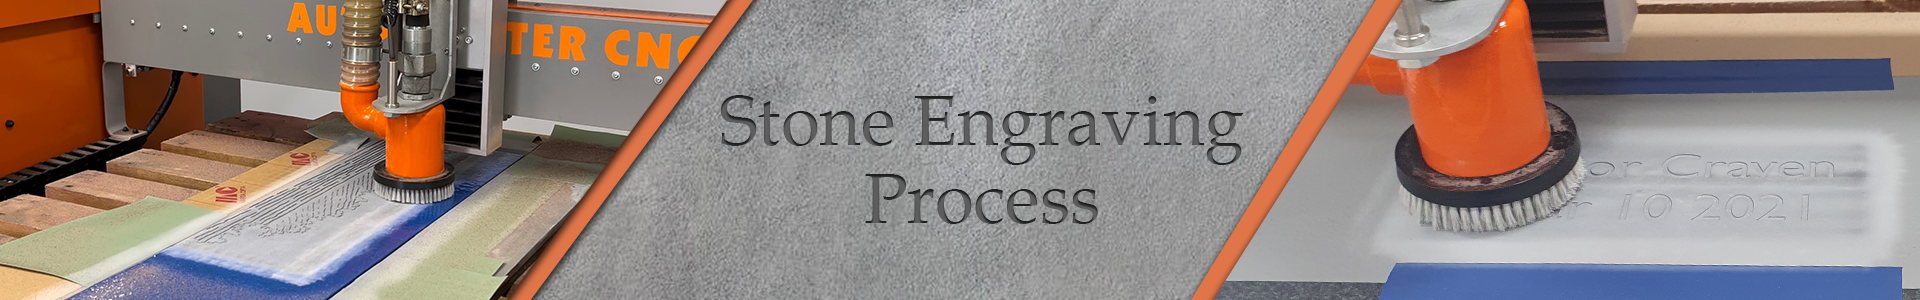 stone-engraving-processt.png